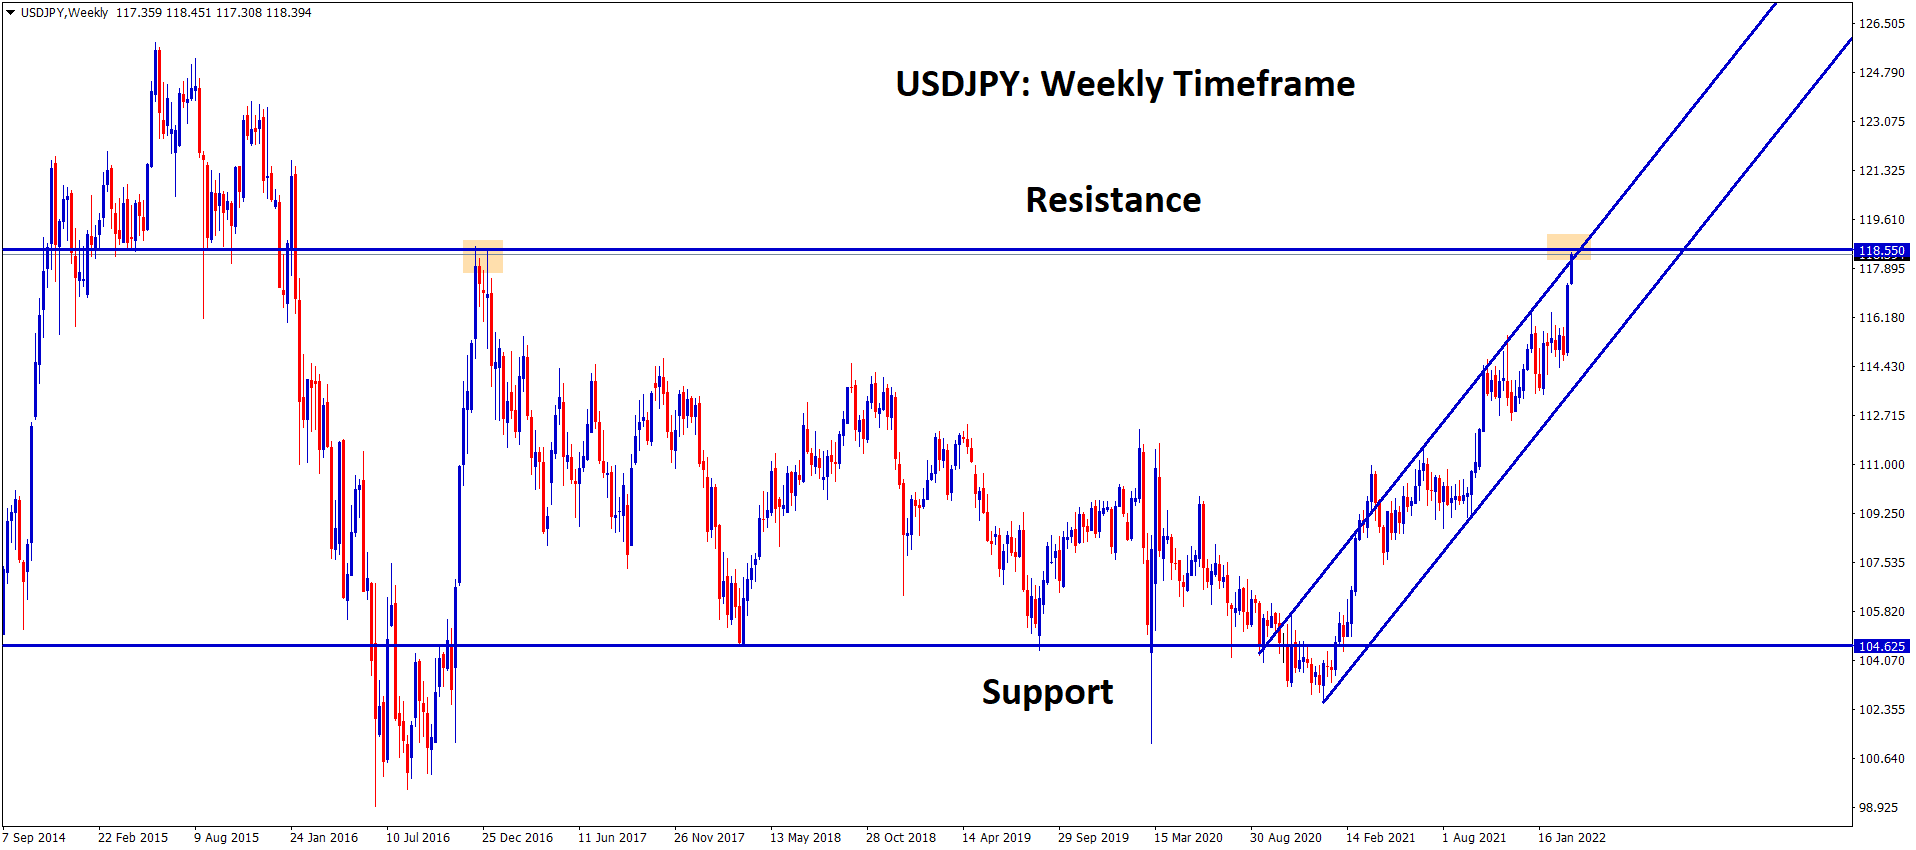 USDJPY hits the major resistance level and the higher high area of the channel